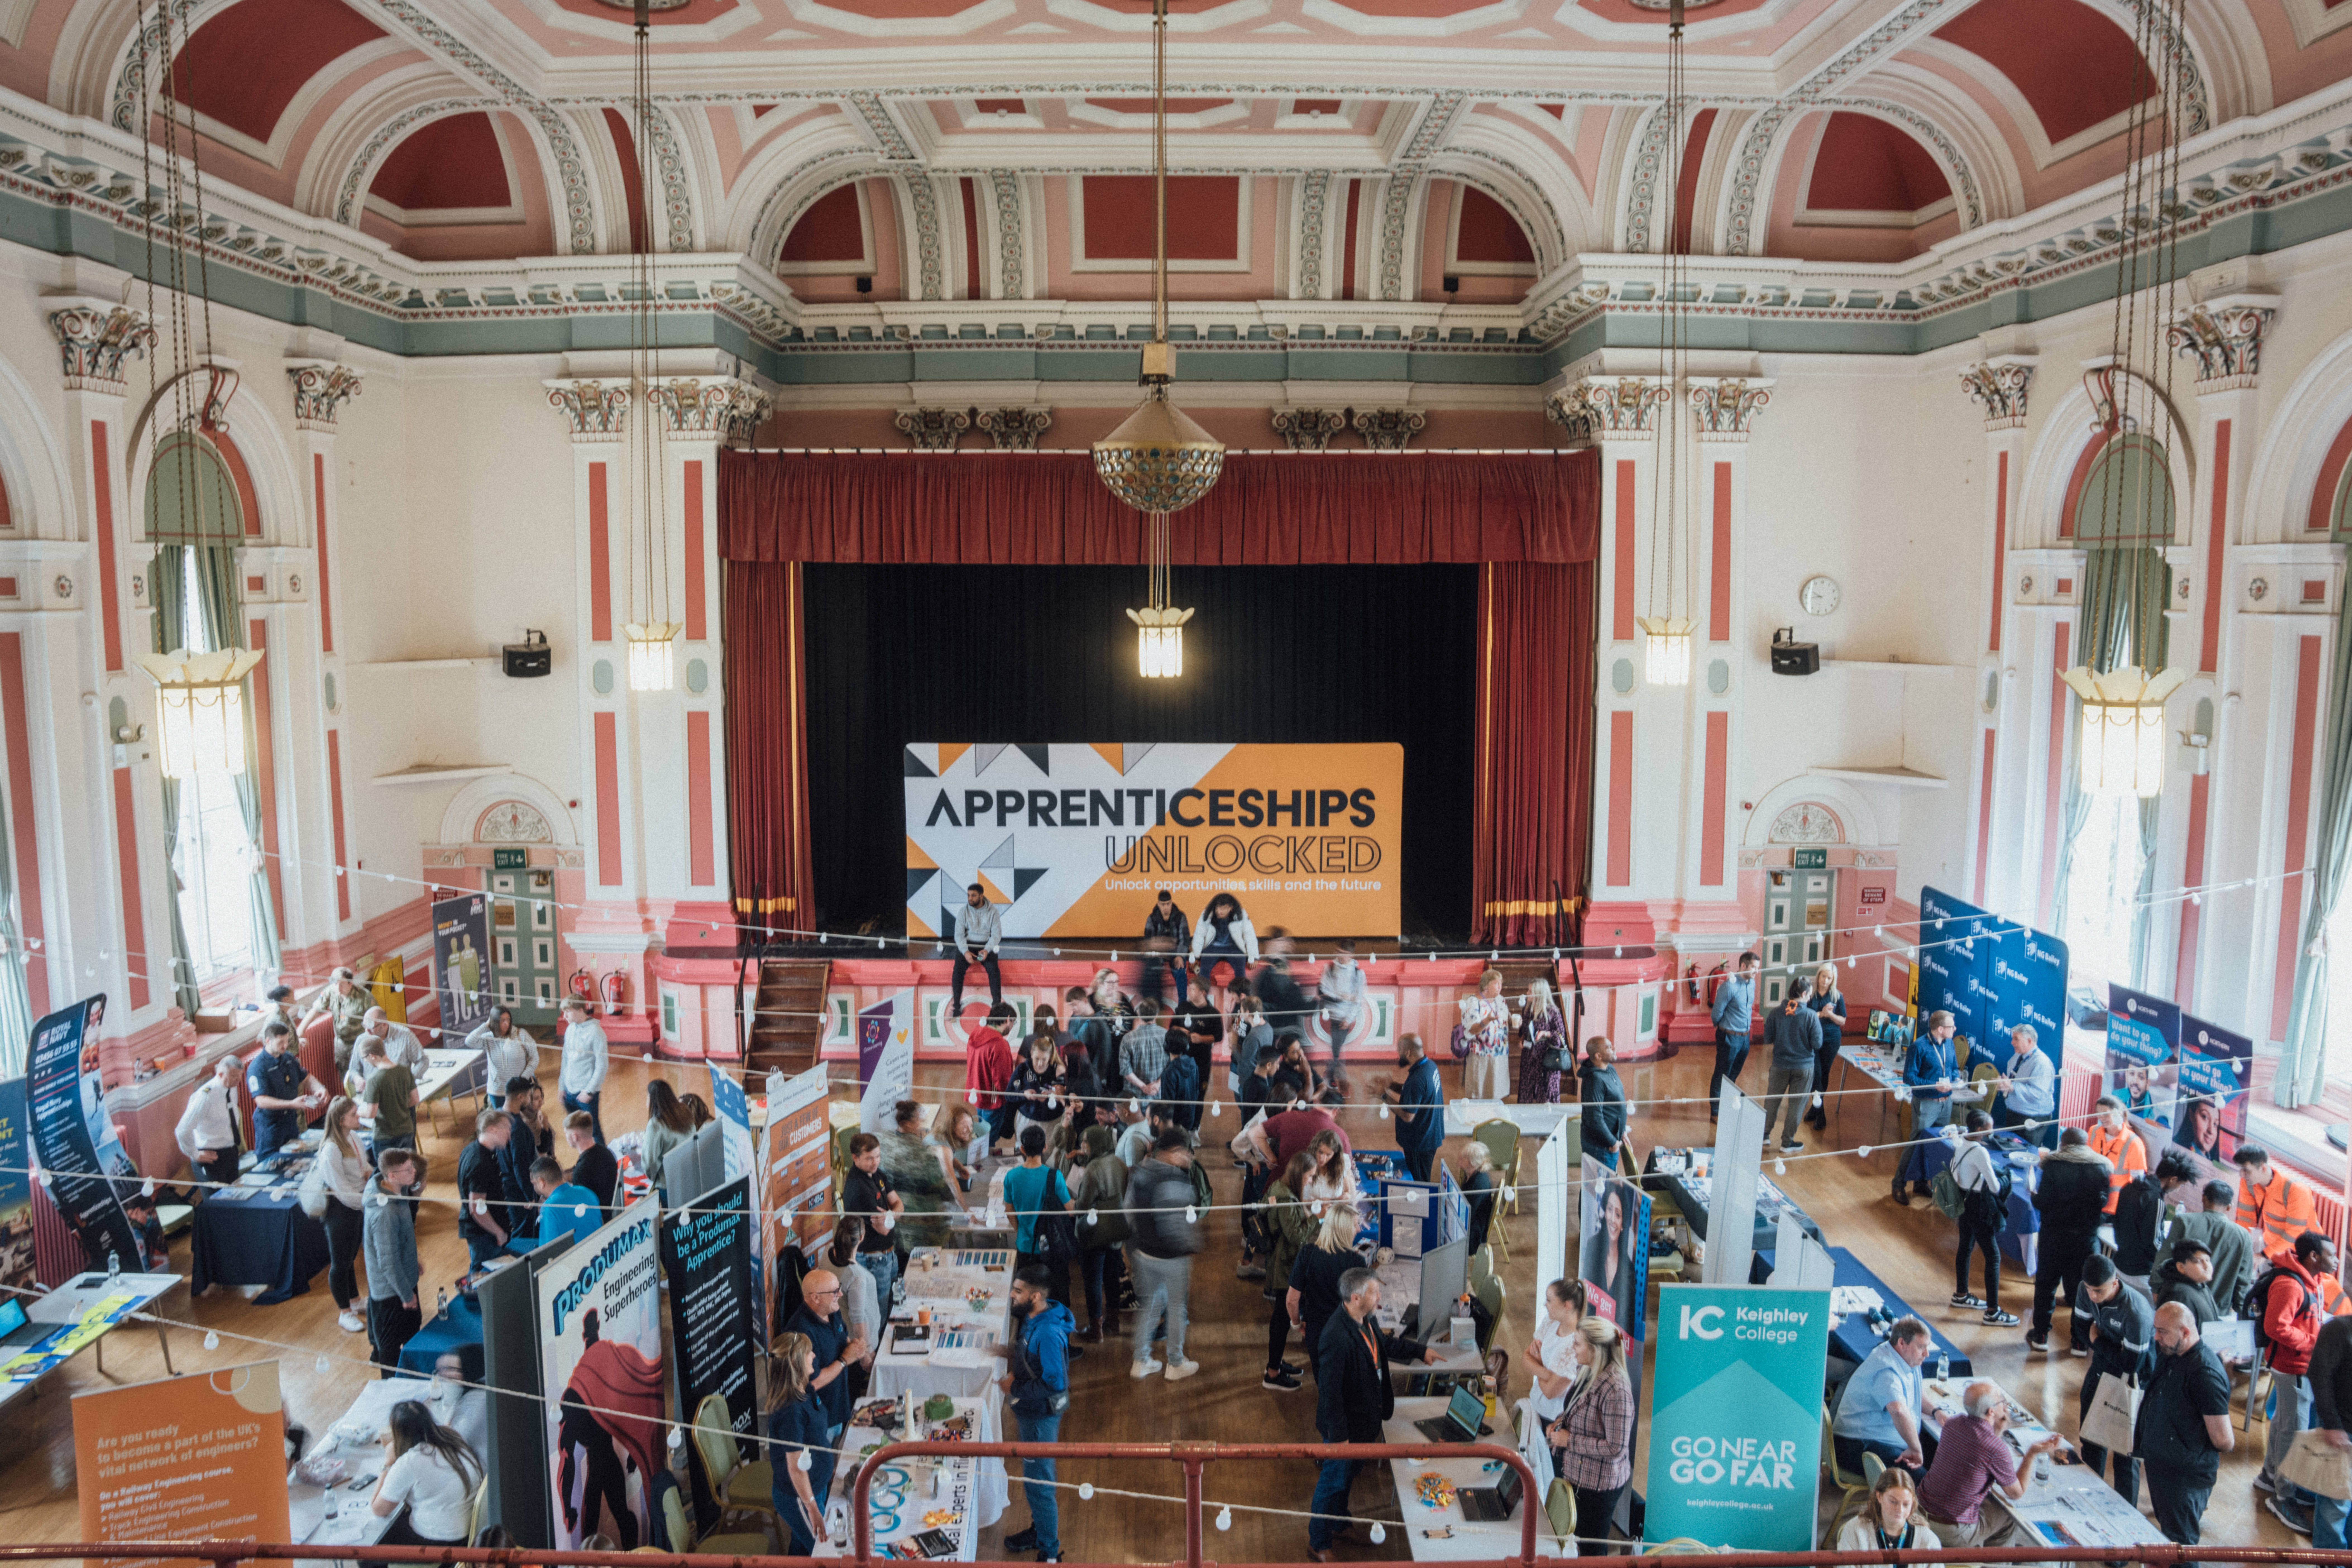 A large hall with stalls, banner stands and lots of people.  The banner at the back reads Apprenticeships Unlocked